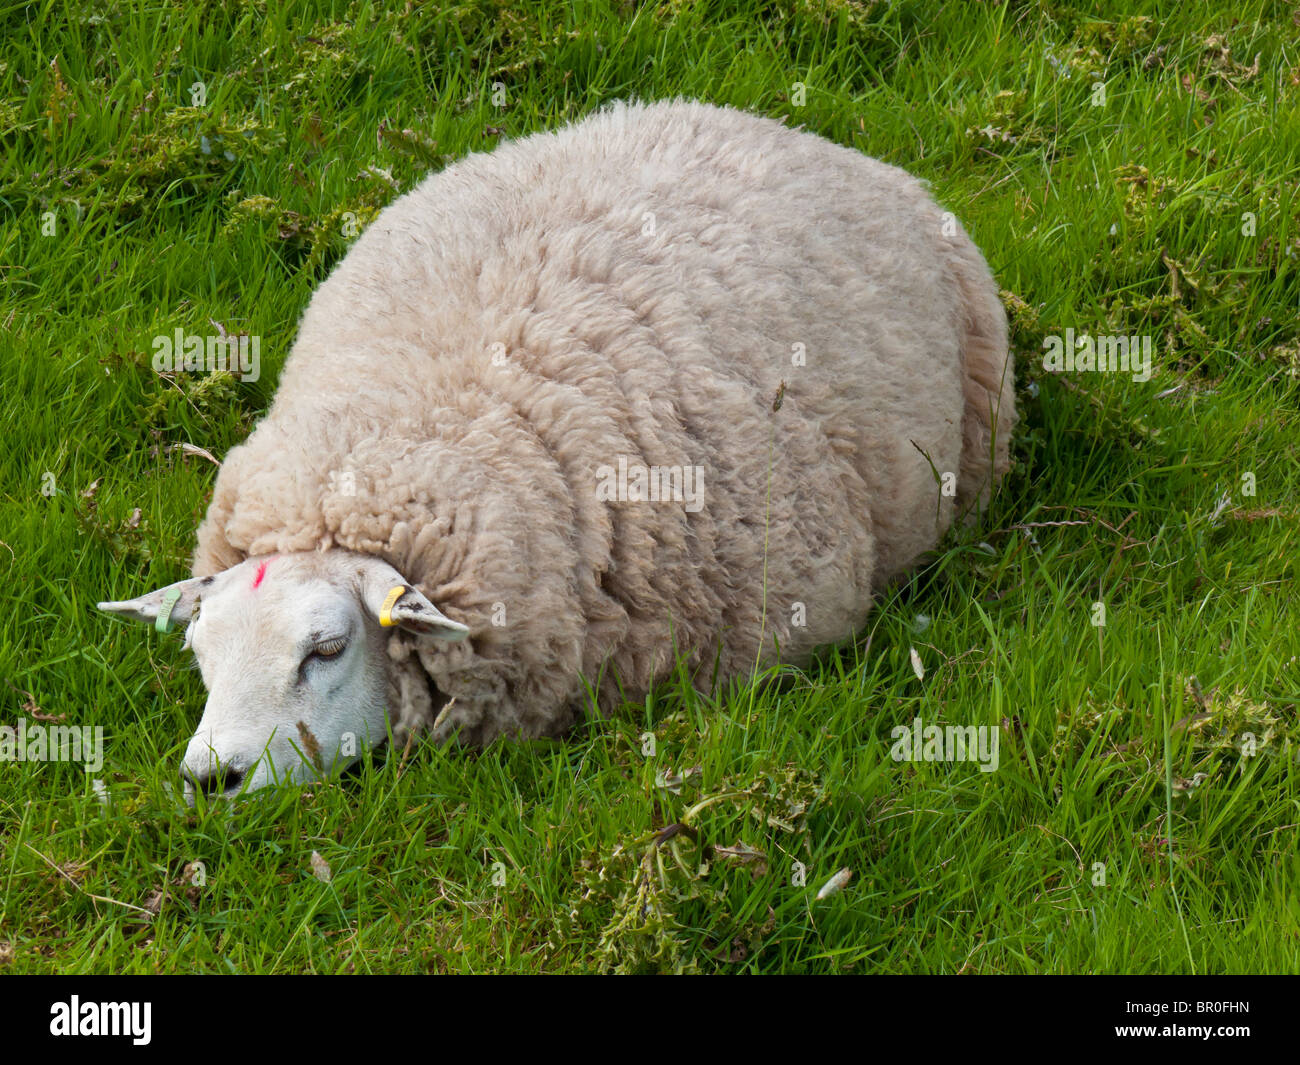 Adult sheep sleeping on green grass with eyes closed in peaceful repose Stock Photo